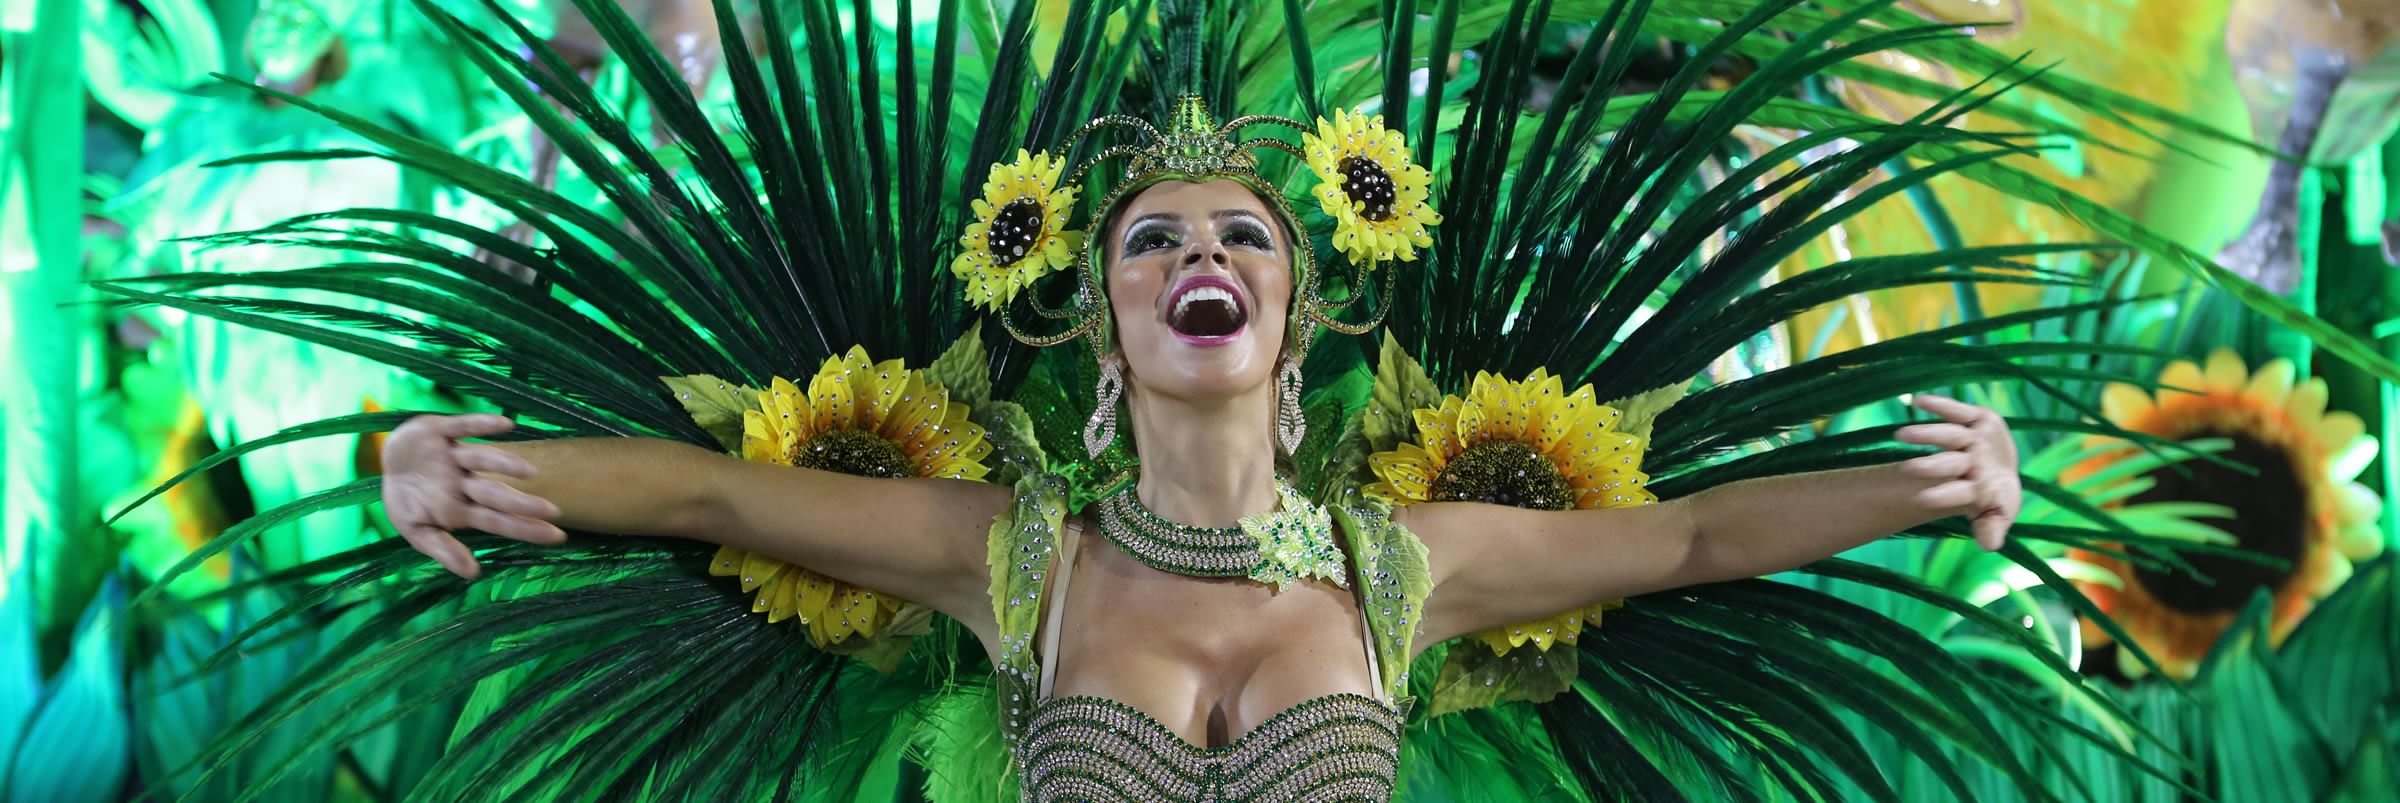 The Rio Carnival - Winners' Parade | Audley Travel